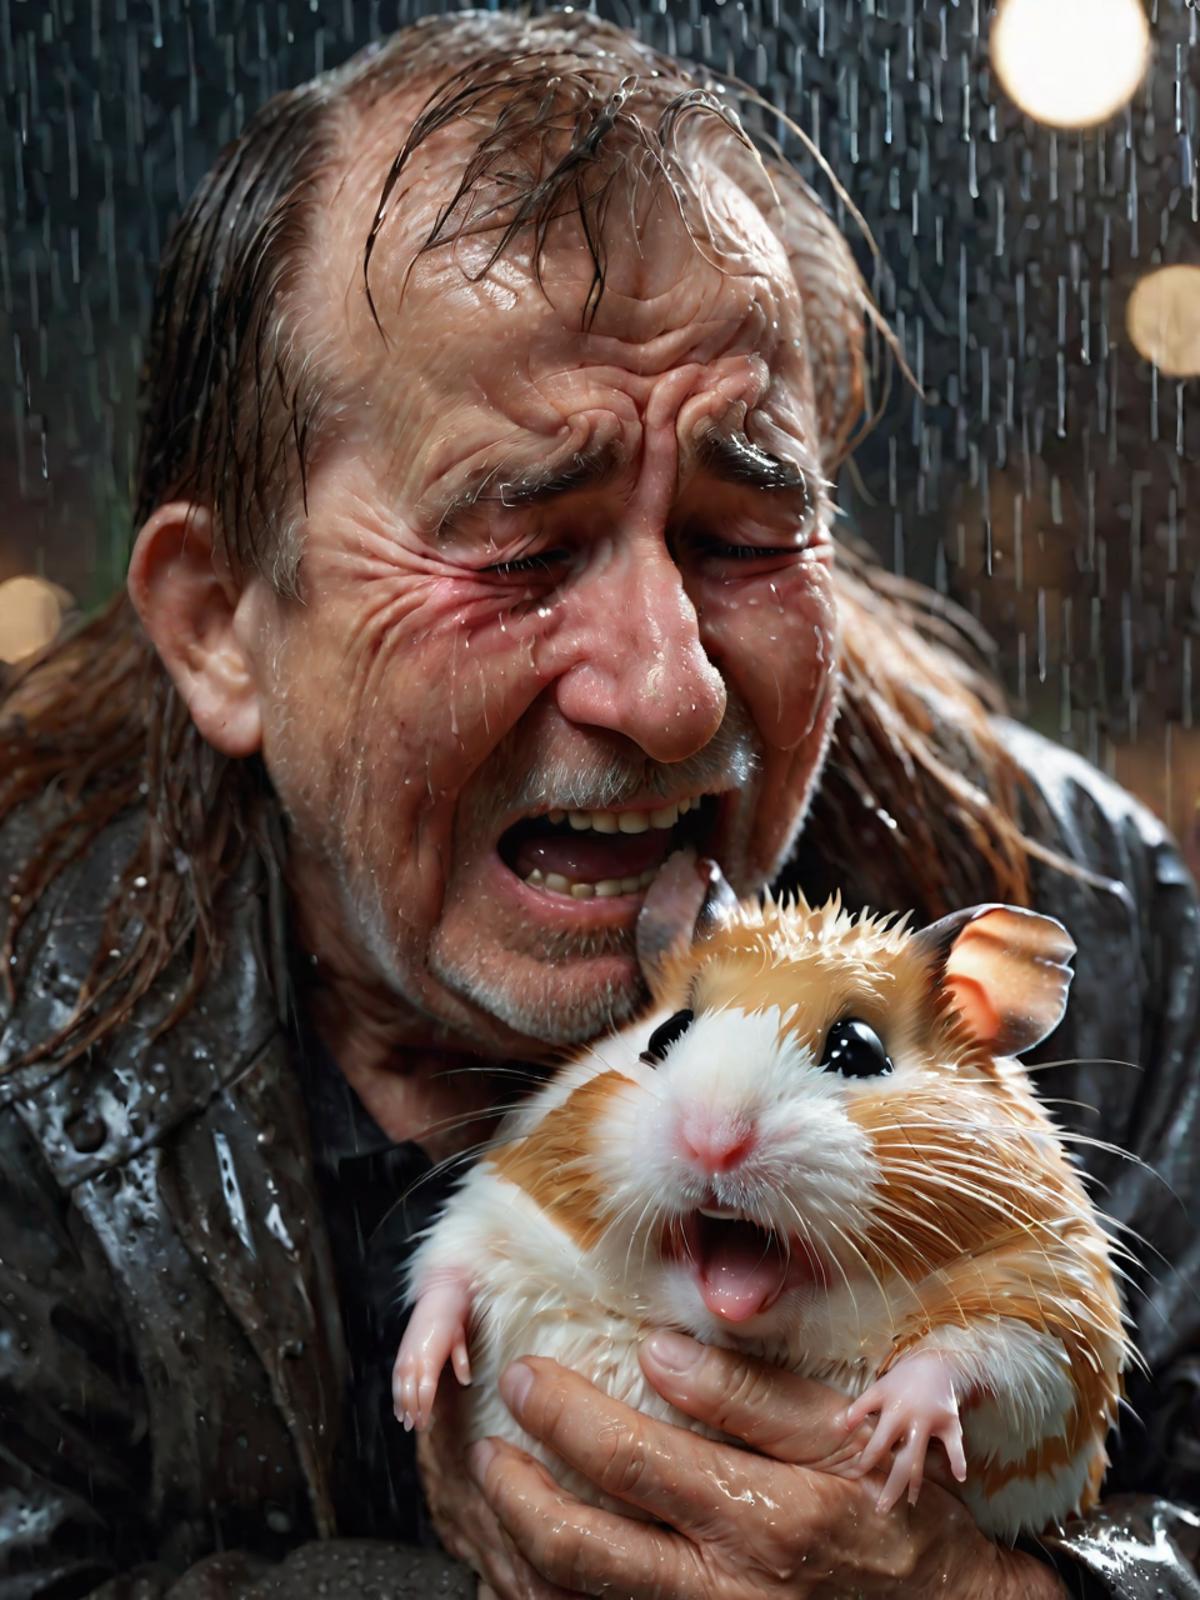 A man holding a wet hamster in the rain.